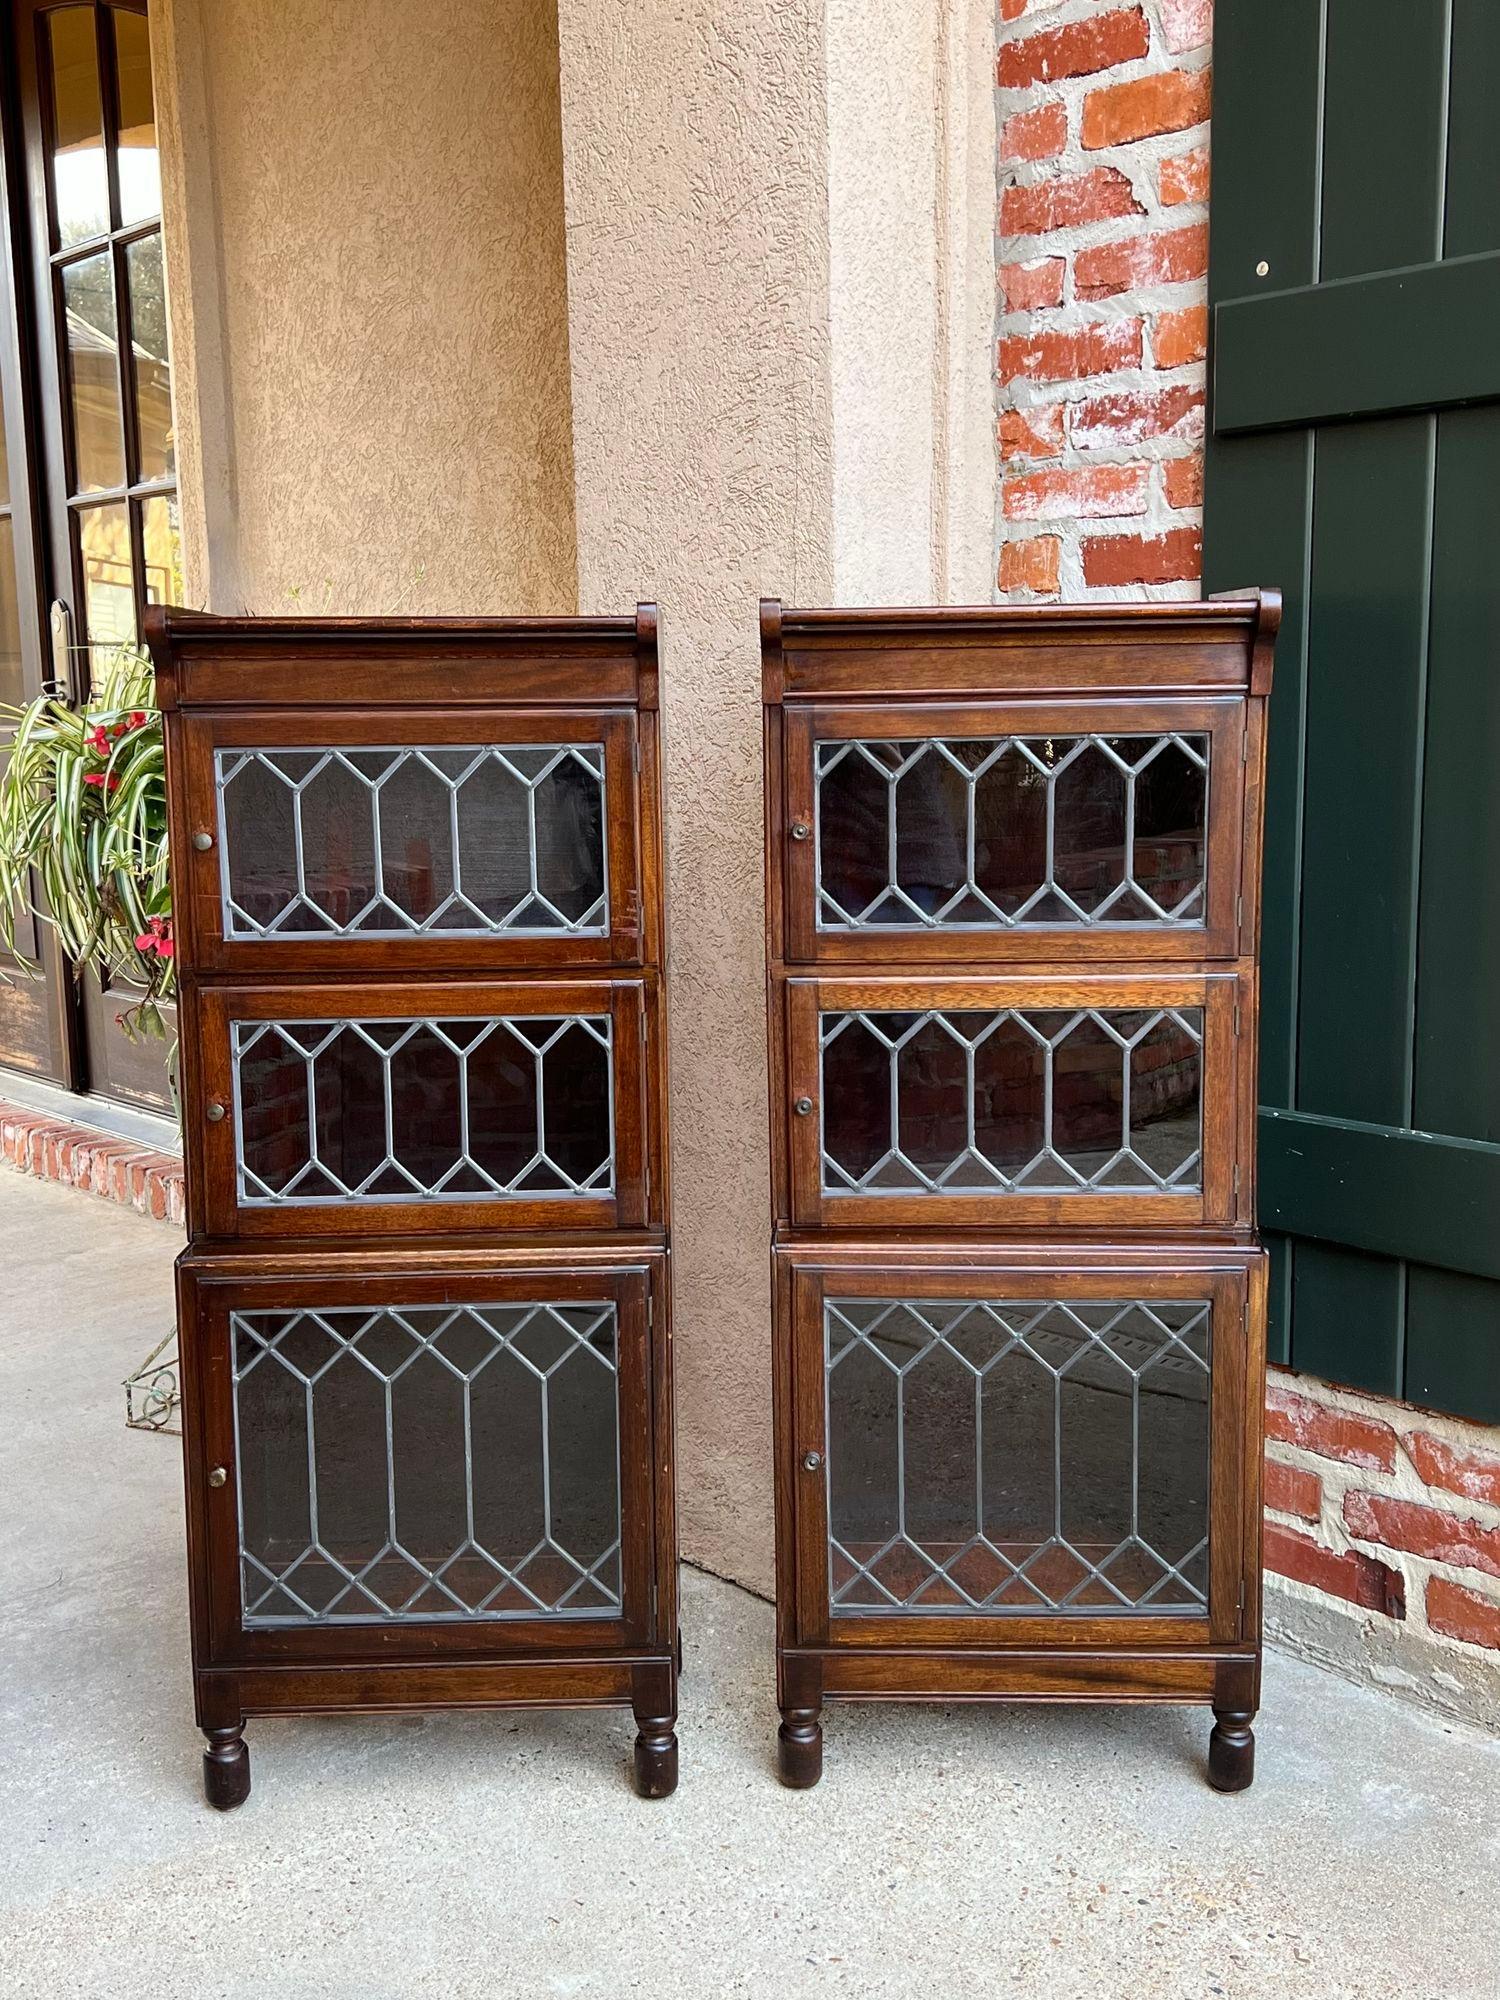 Pair antique petite English lawyer barrister bookcase leaded glass mahogany.

 Direct from London, England, a PAIR of antique English “barrister” style stacking bookcases!! Hard-to-find super petite size, yet with all the features of a full-size